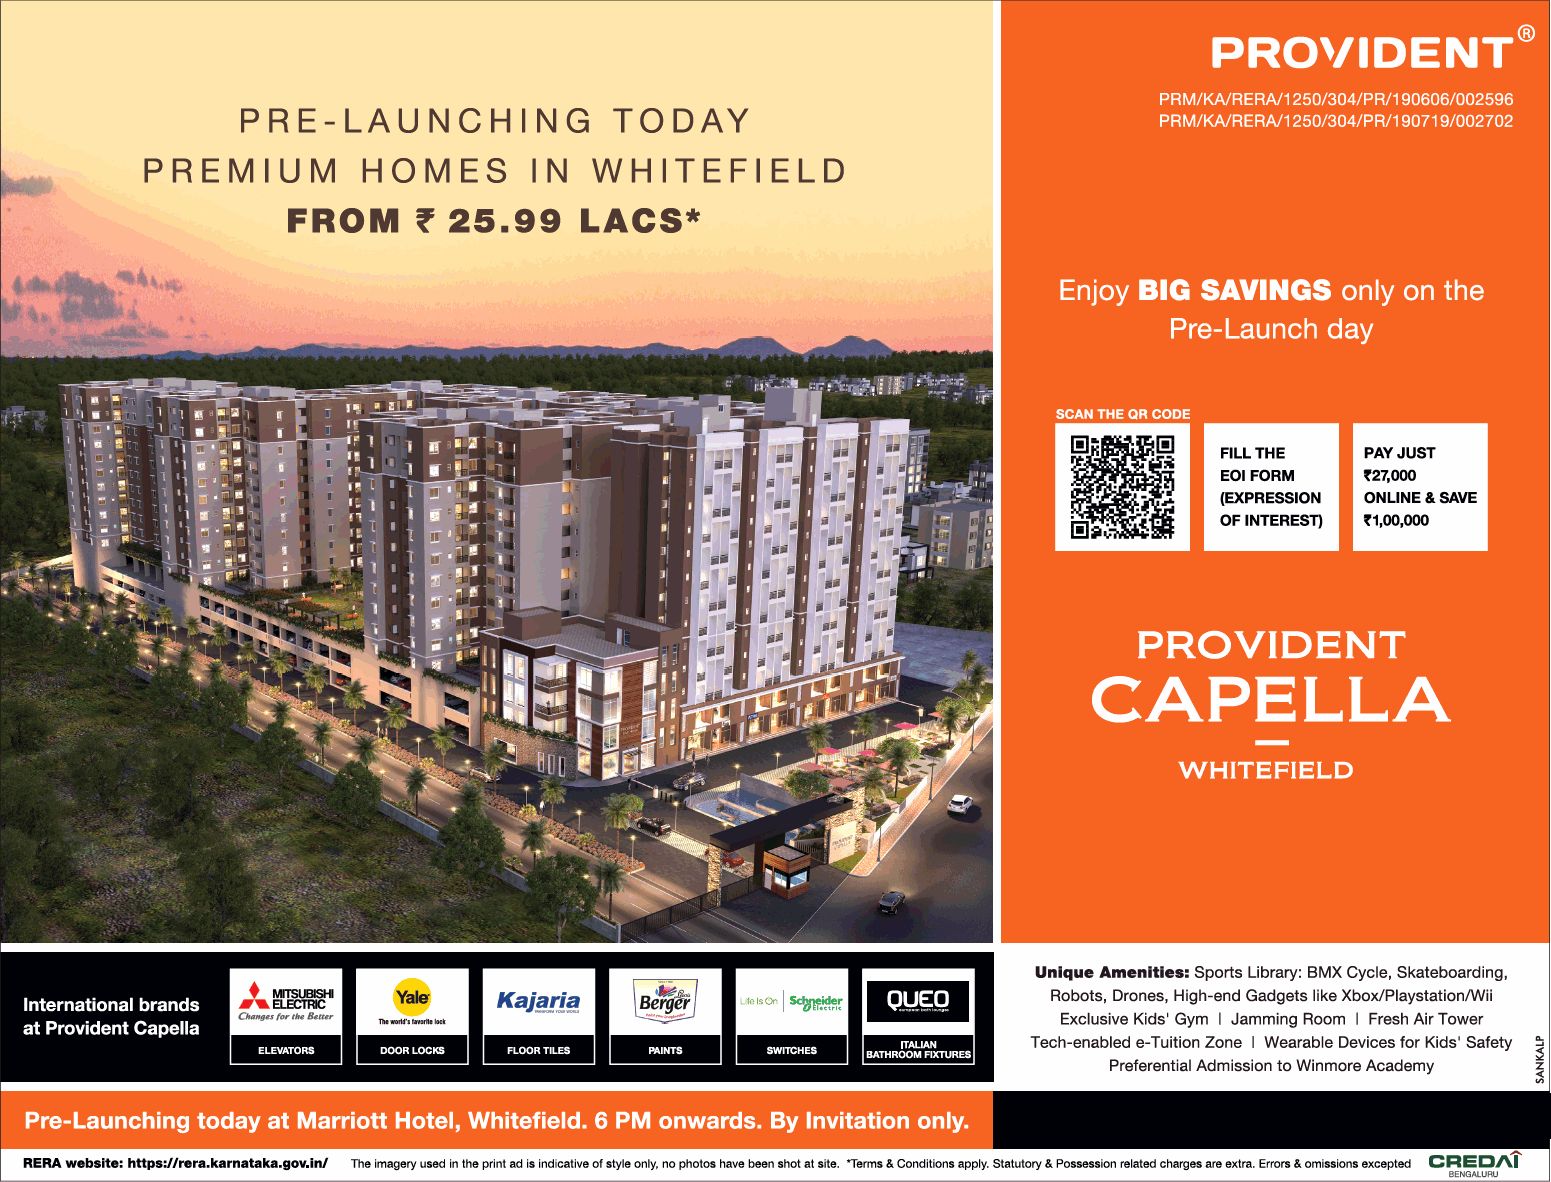 Provident Capella pre-launching today premium homes Rs 25.99 Lac in Whitefield, Bangalore Update